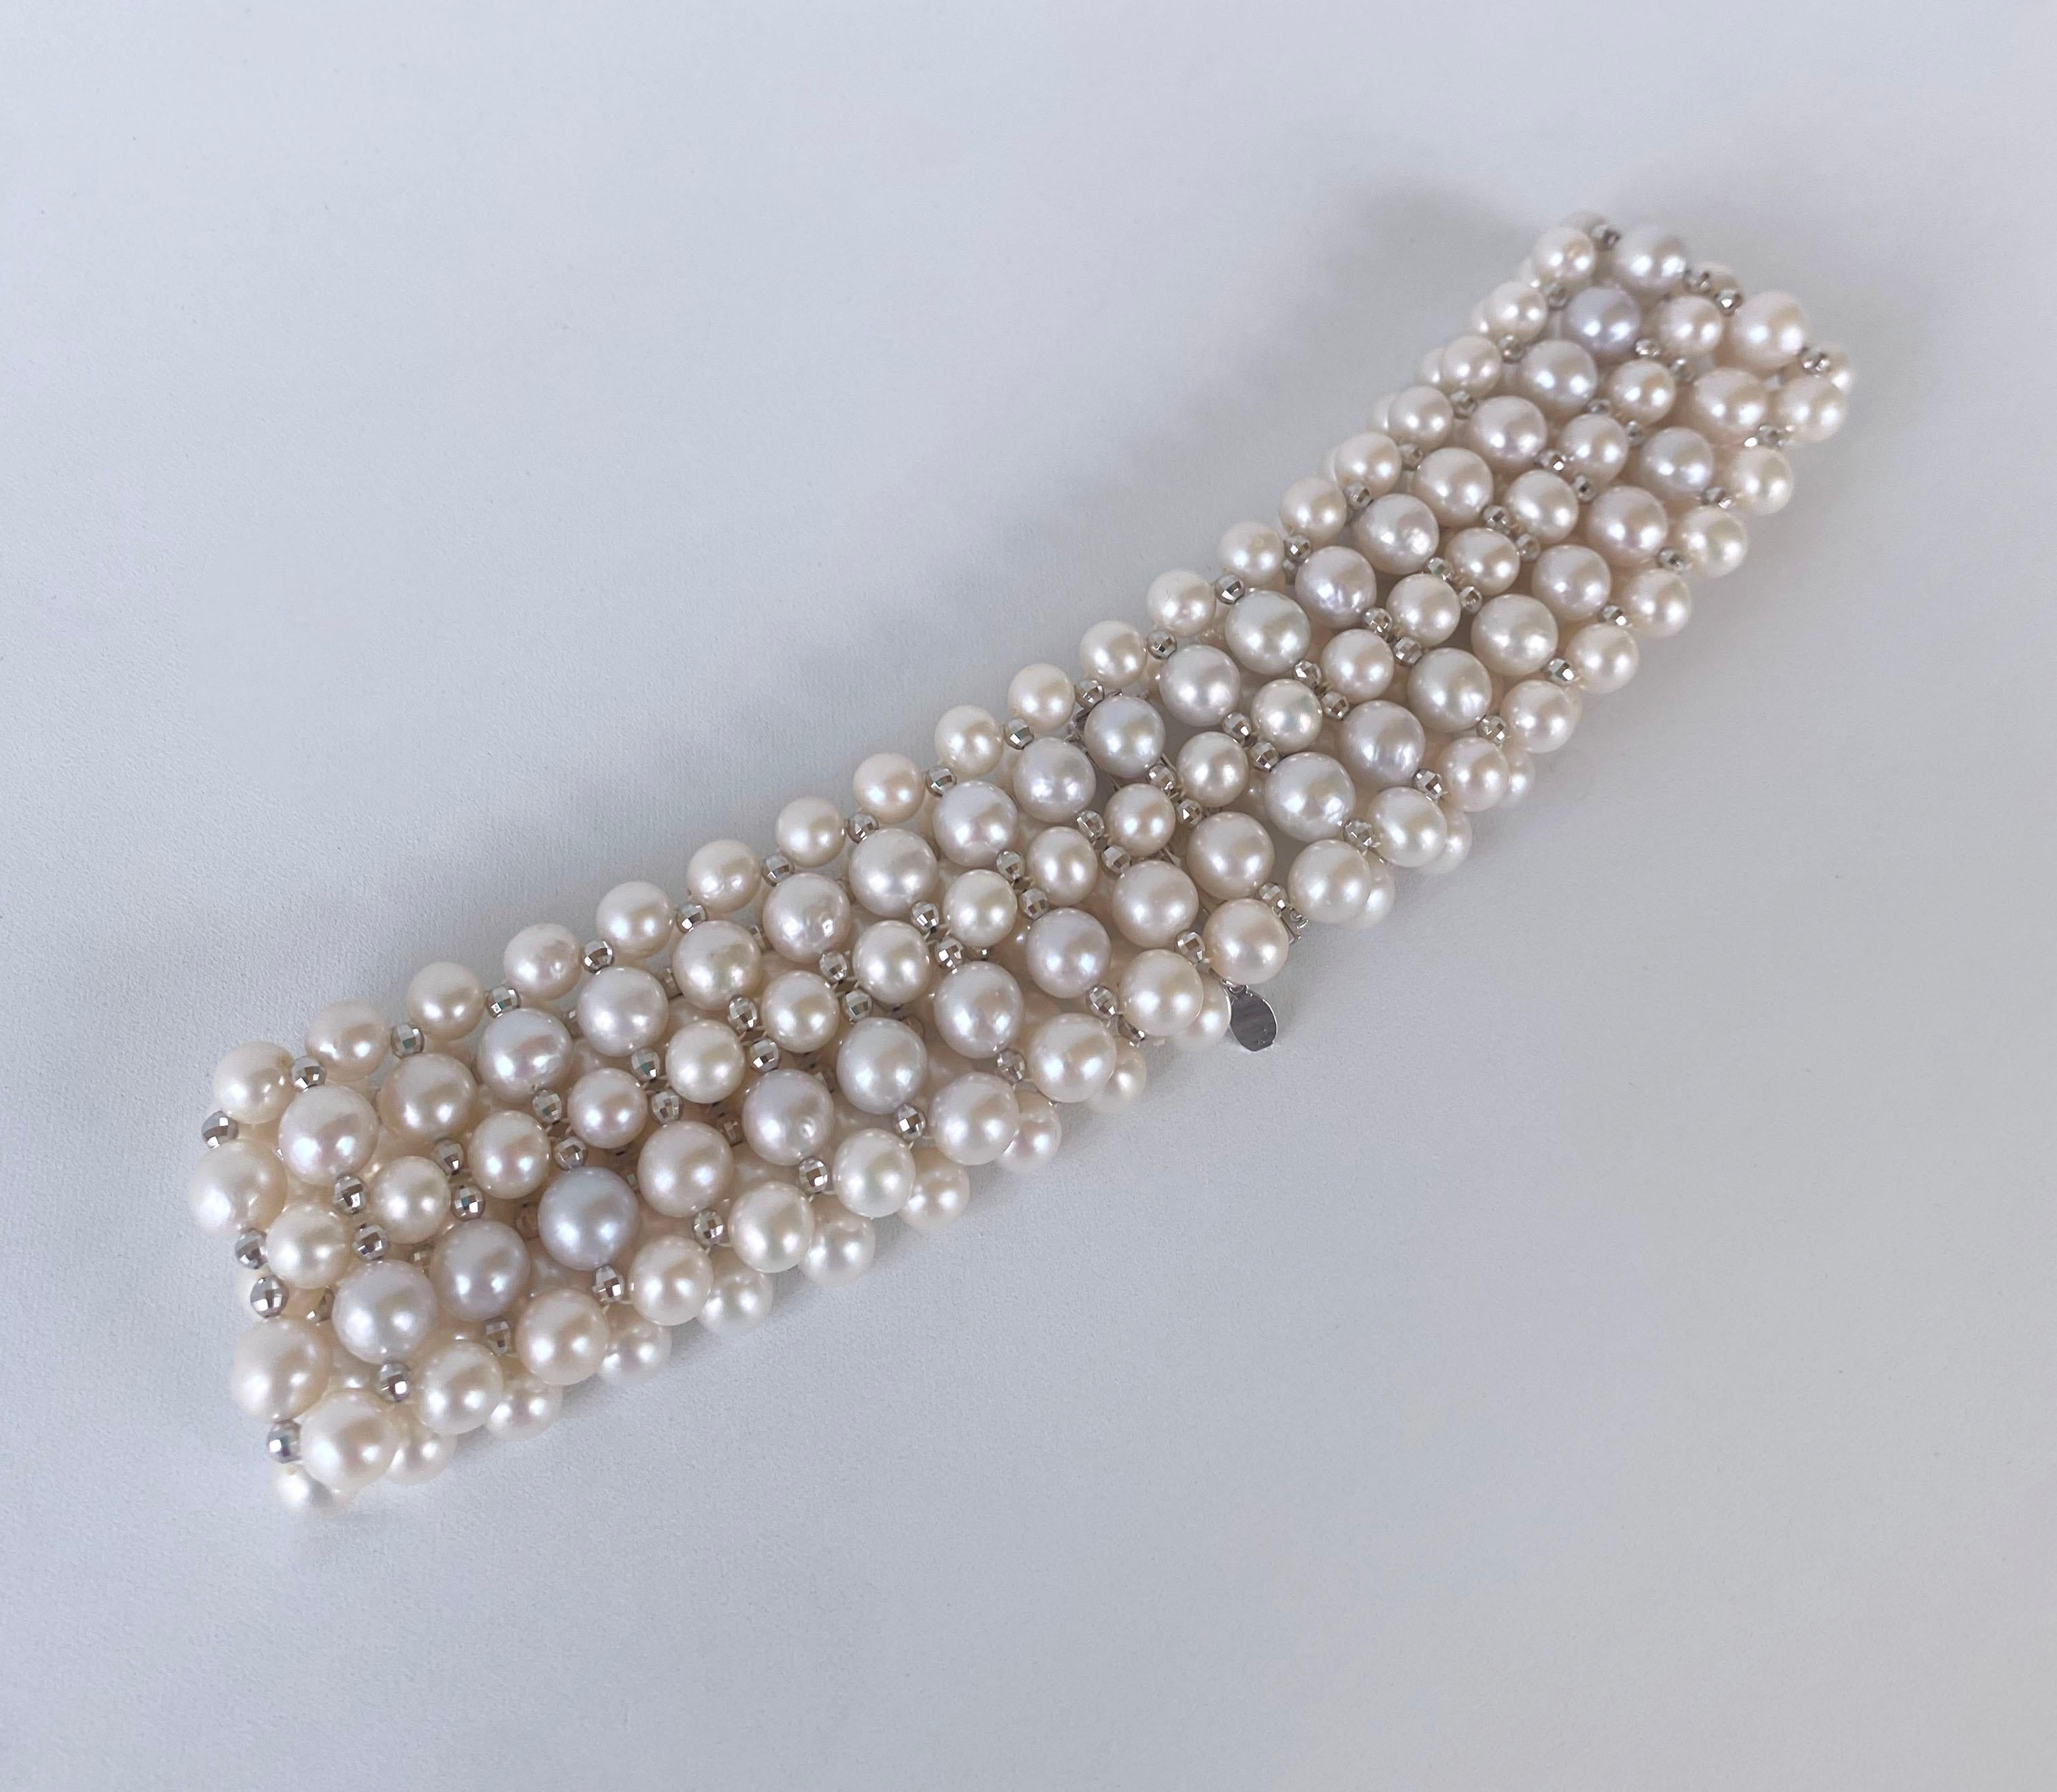 This beautiful choker features high luster White Pearls which display a wonderful sheen, all woven together into a beautiful design. Faceted, White Gold Plated Silver beads are woven between Pearls, adorning this necklace with a great and dramatic